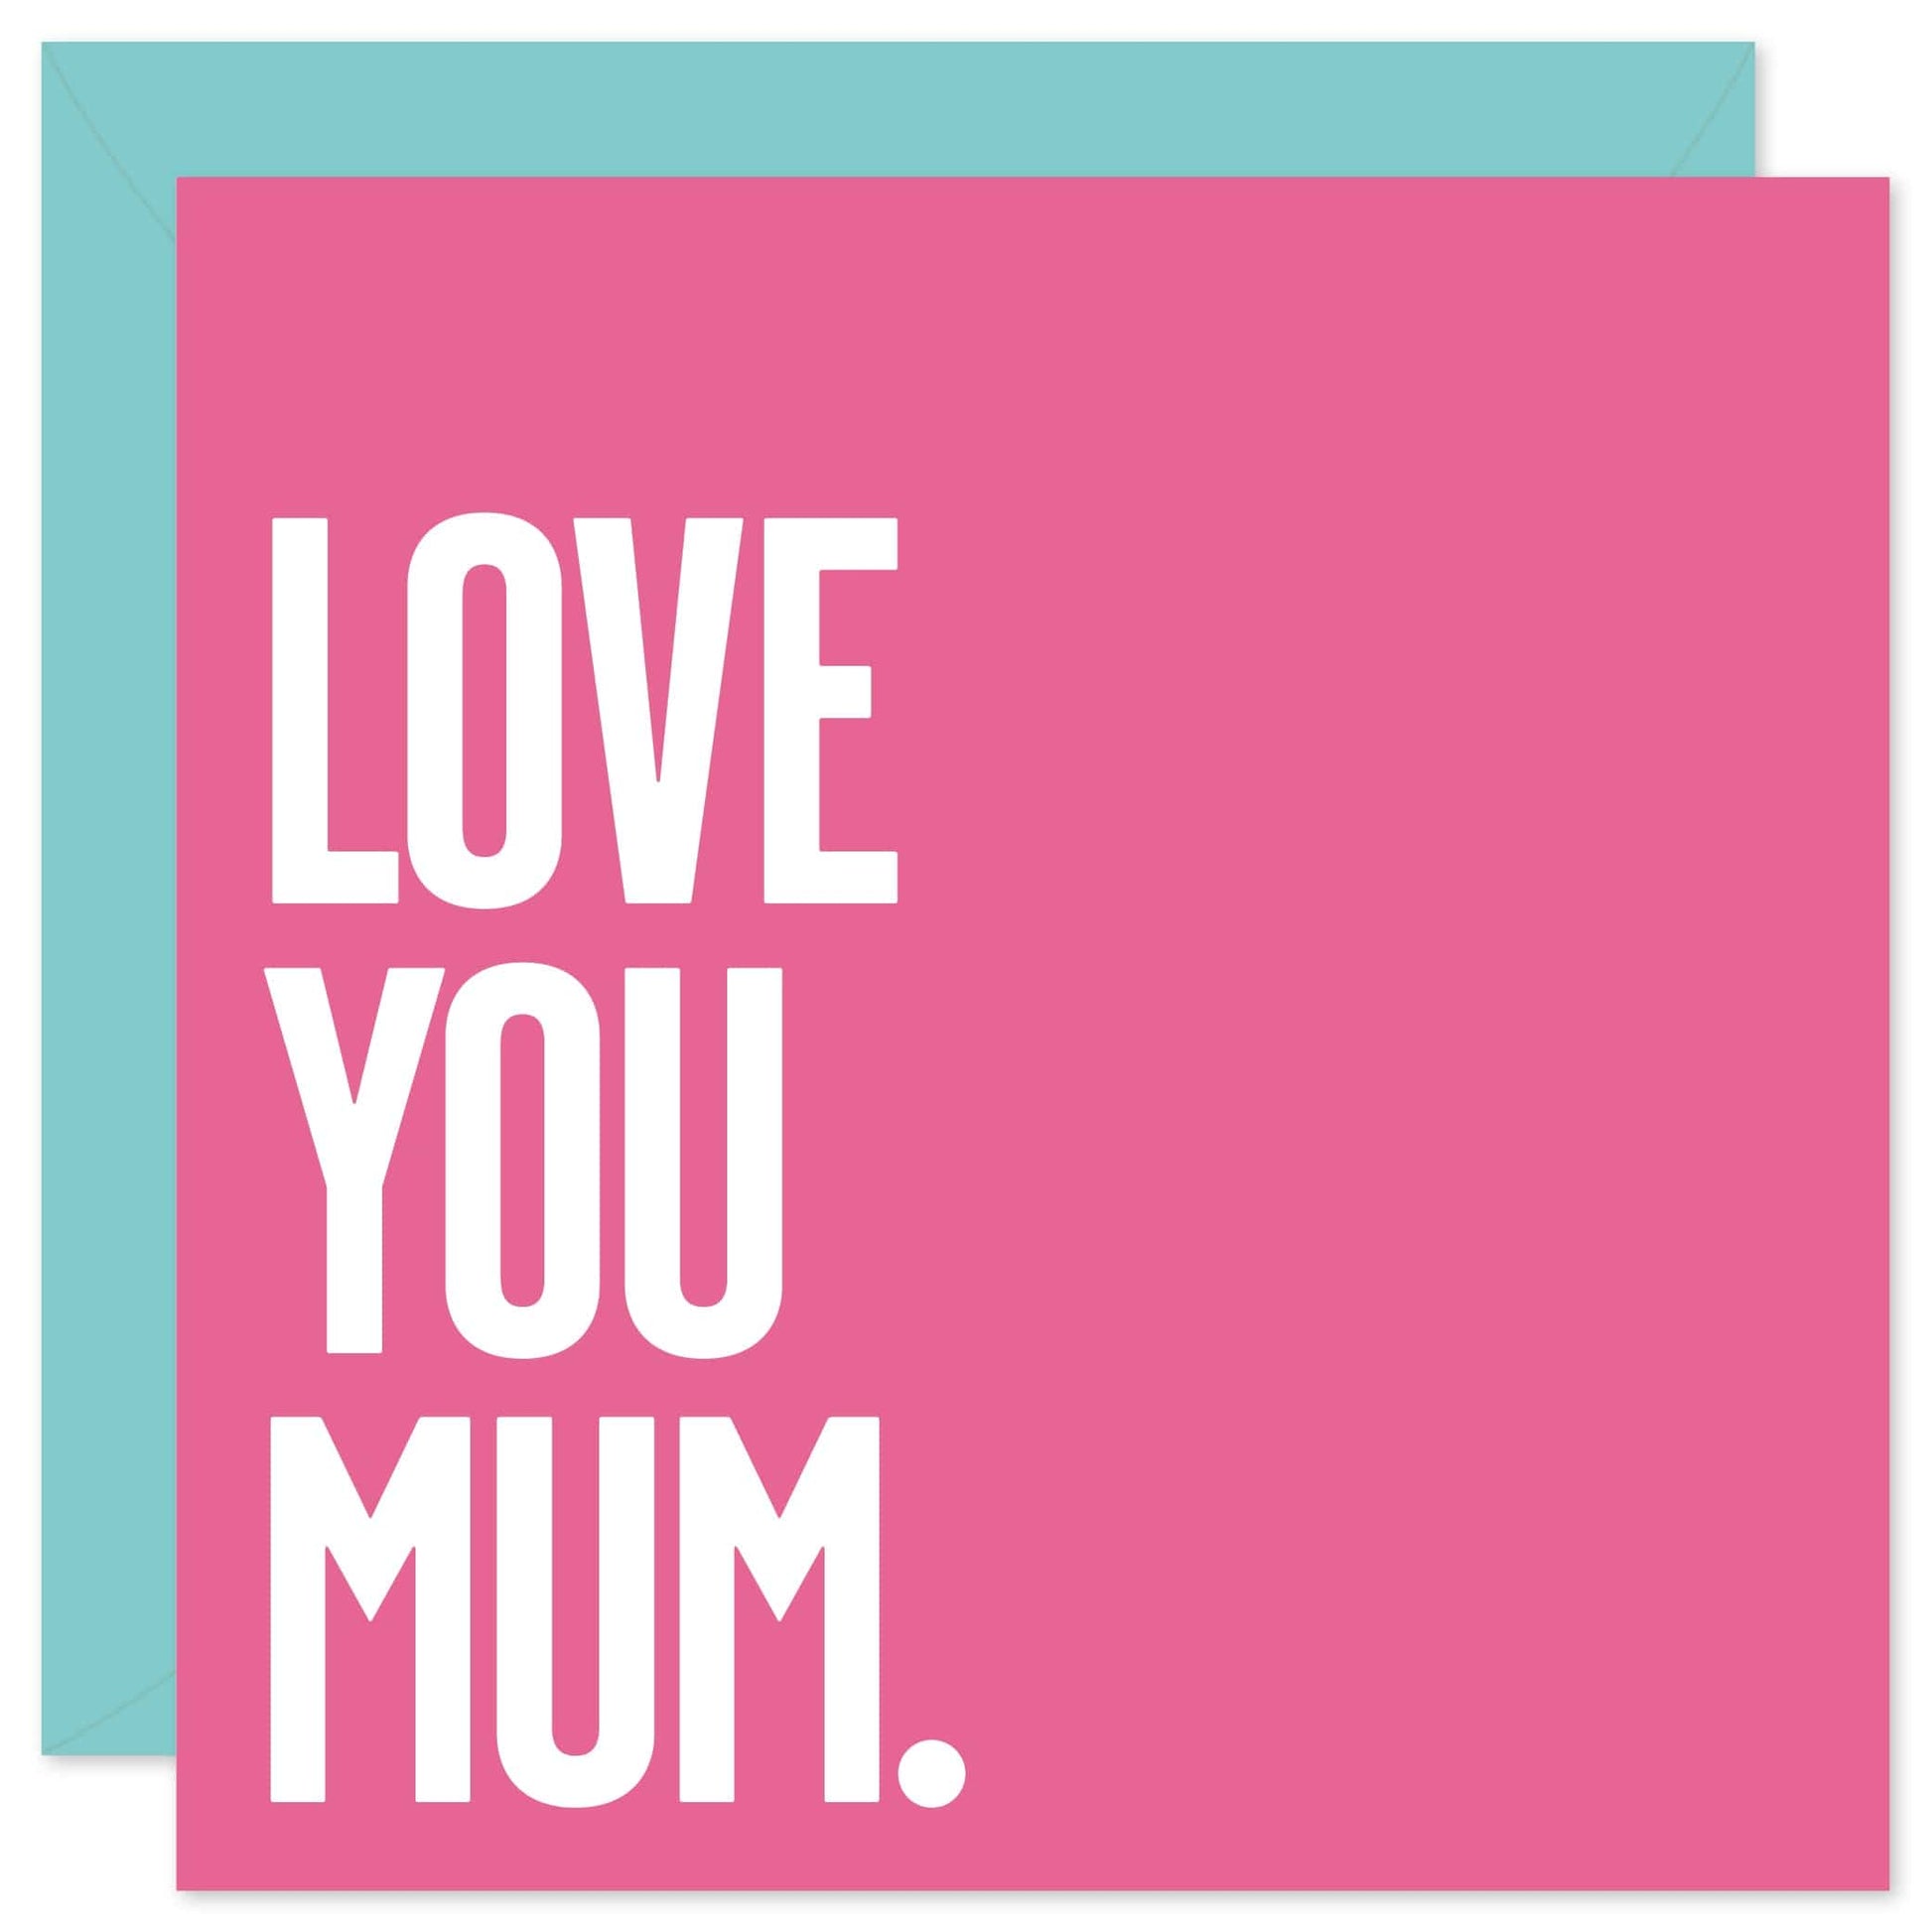 Love you mum card from Purple Tree Designs